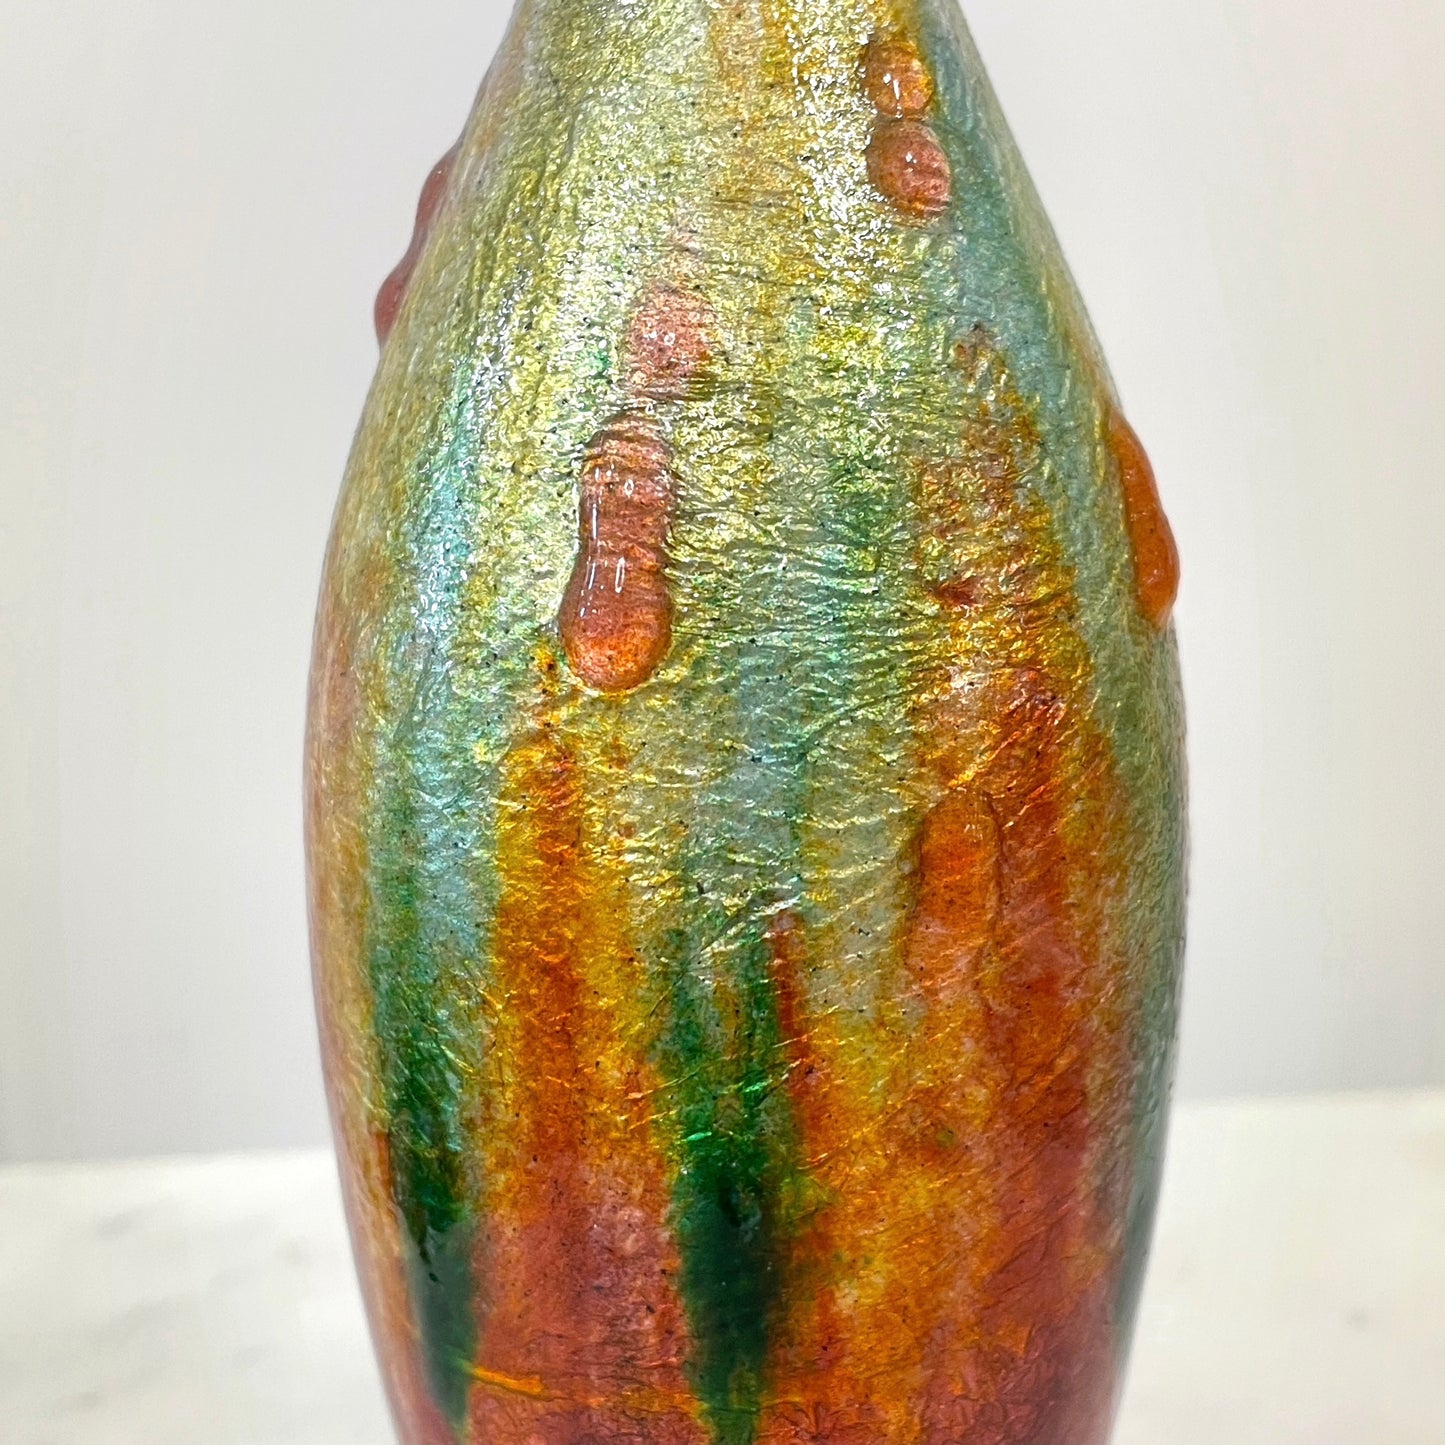 Camille Faure Art Nouveau French Limoges Yellow Green Red Enamels Copper Vase